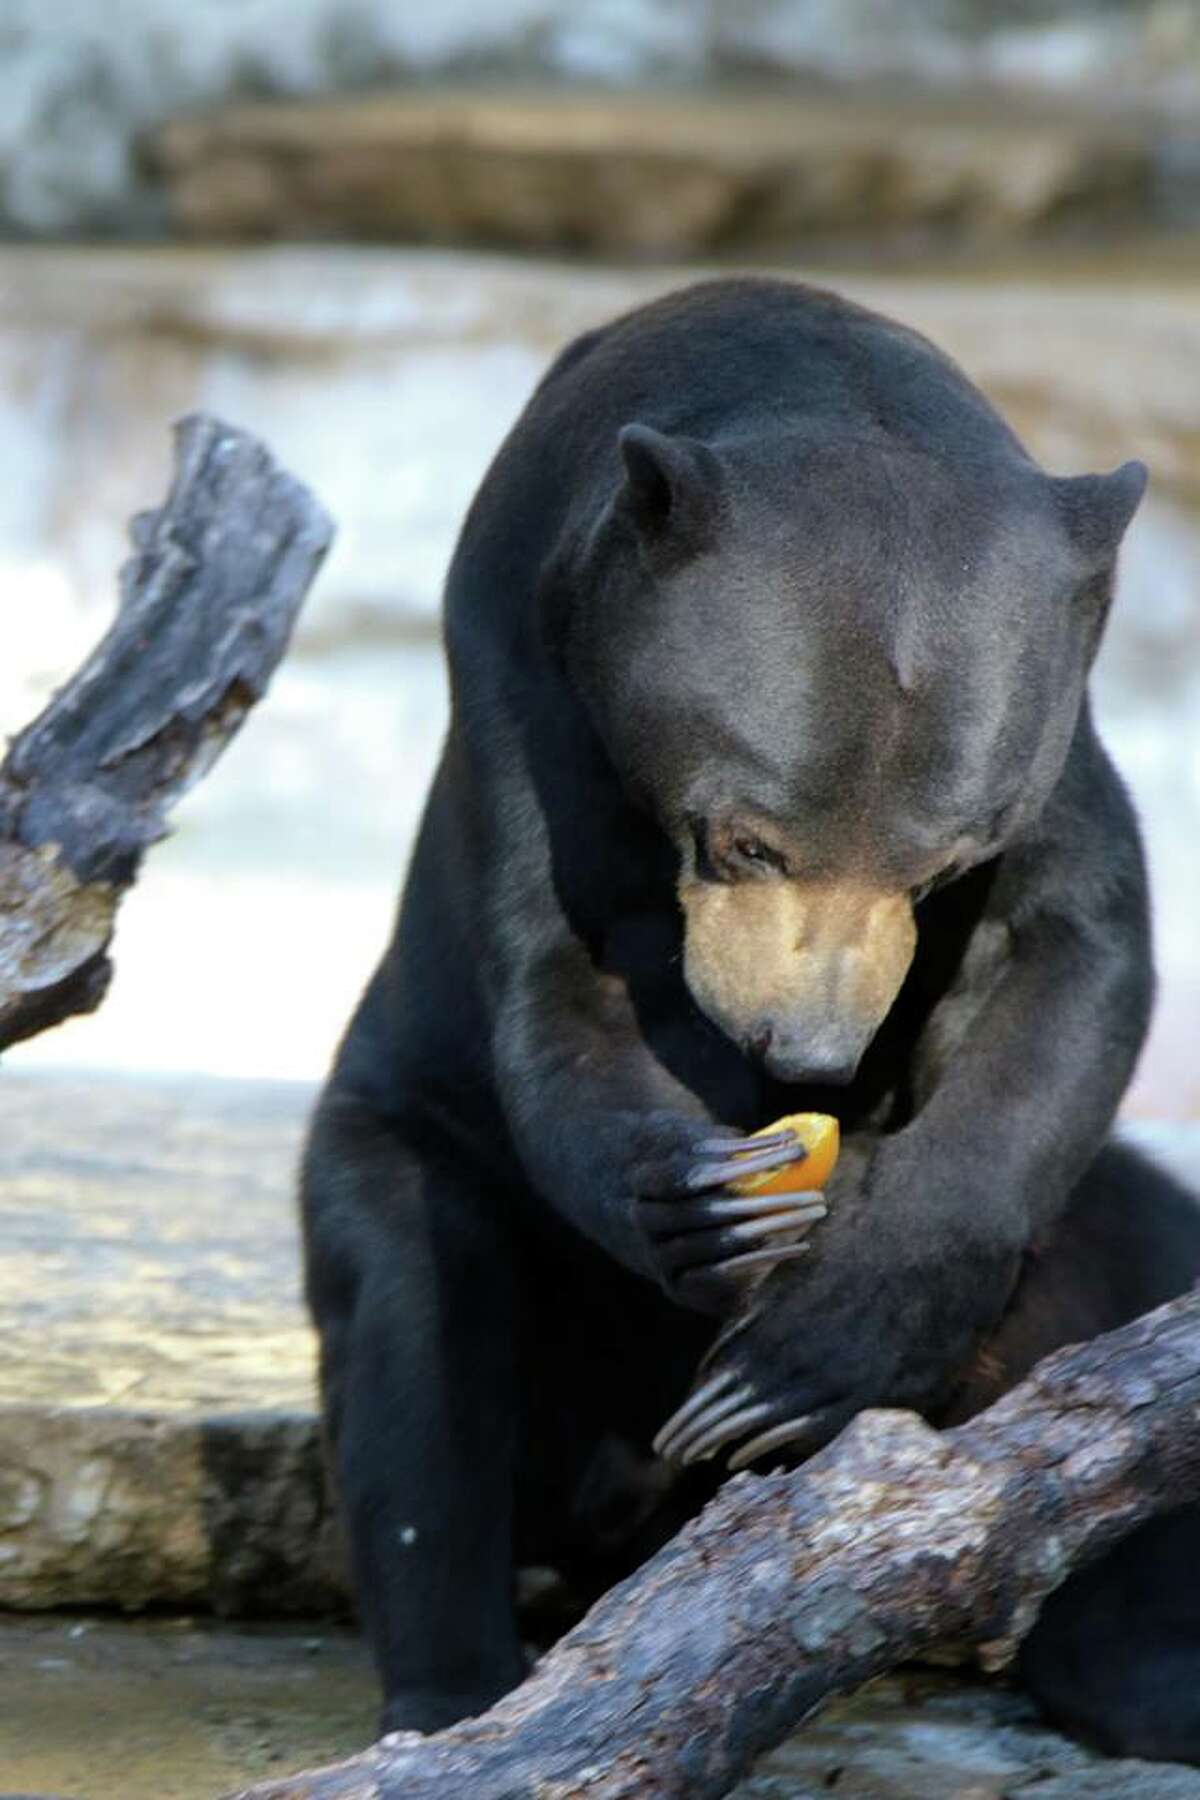 Baubles, a 14-year-old Malayan sun bear, passed away at the San Antonio Zoo March 7, 2018 after a battle with heart disease.